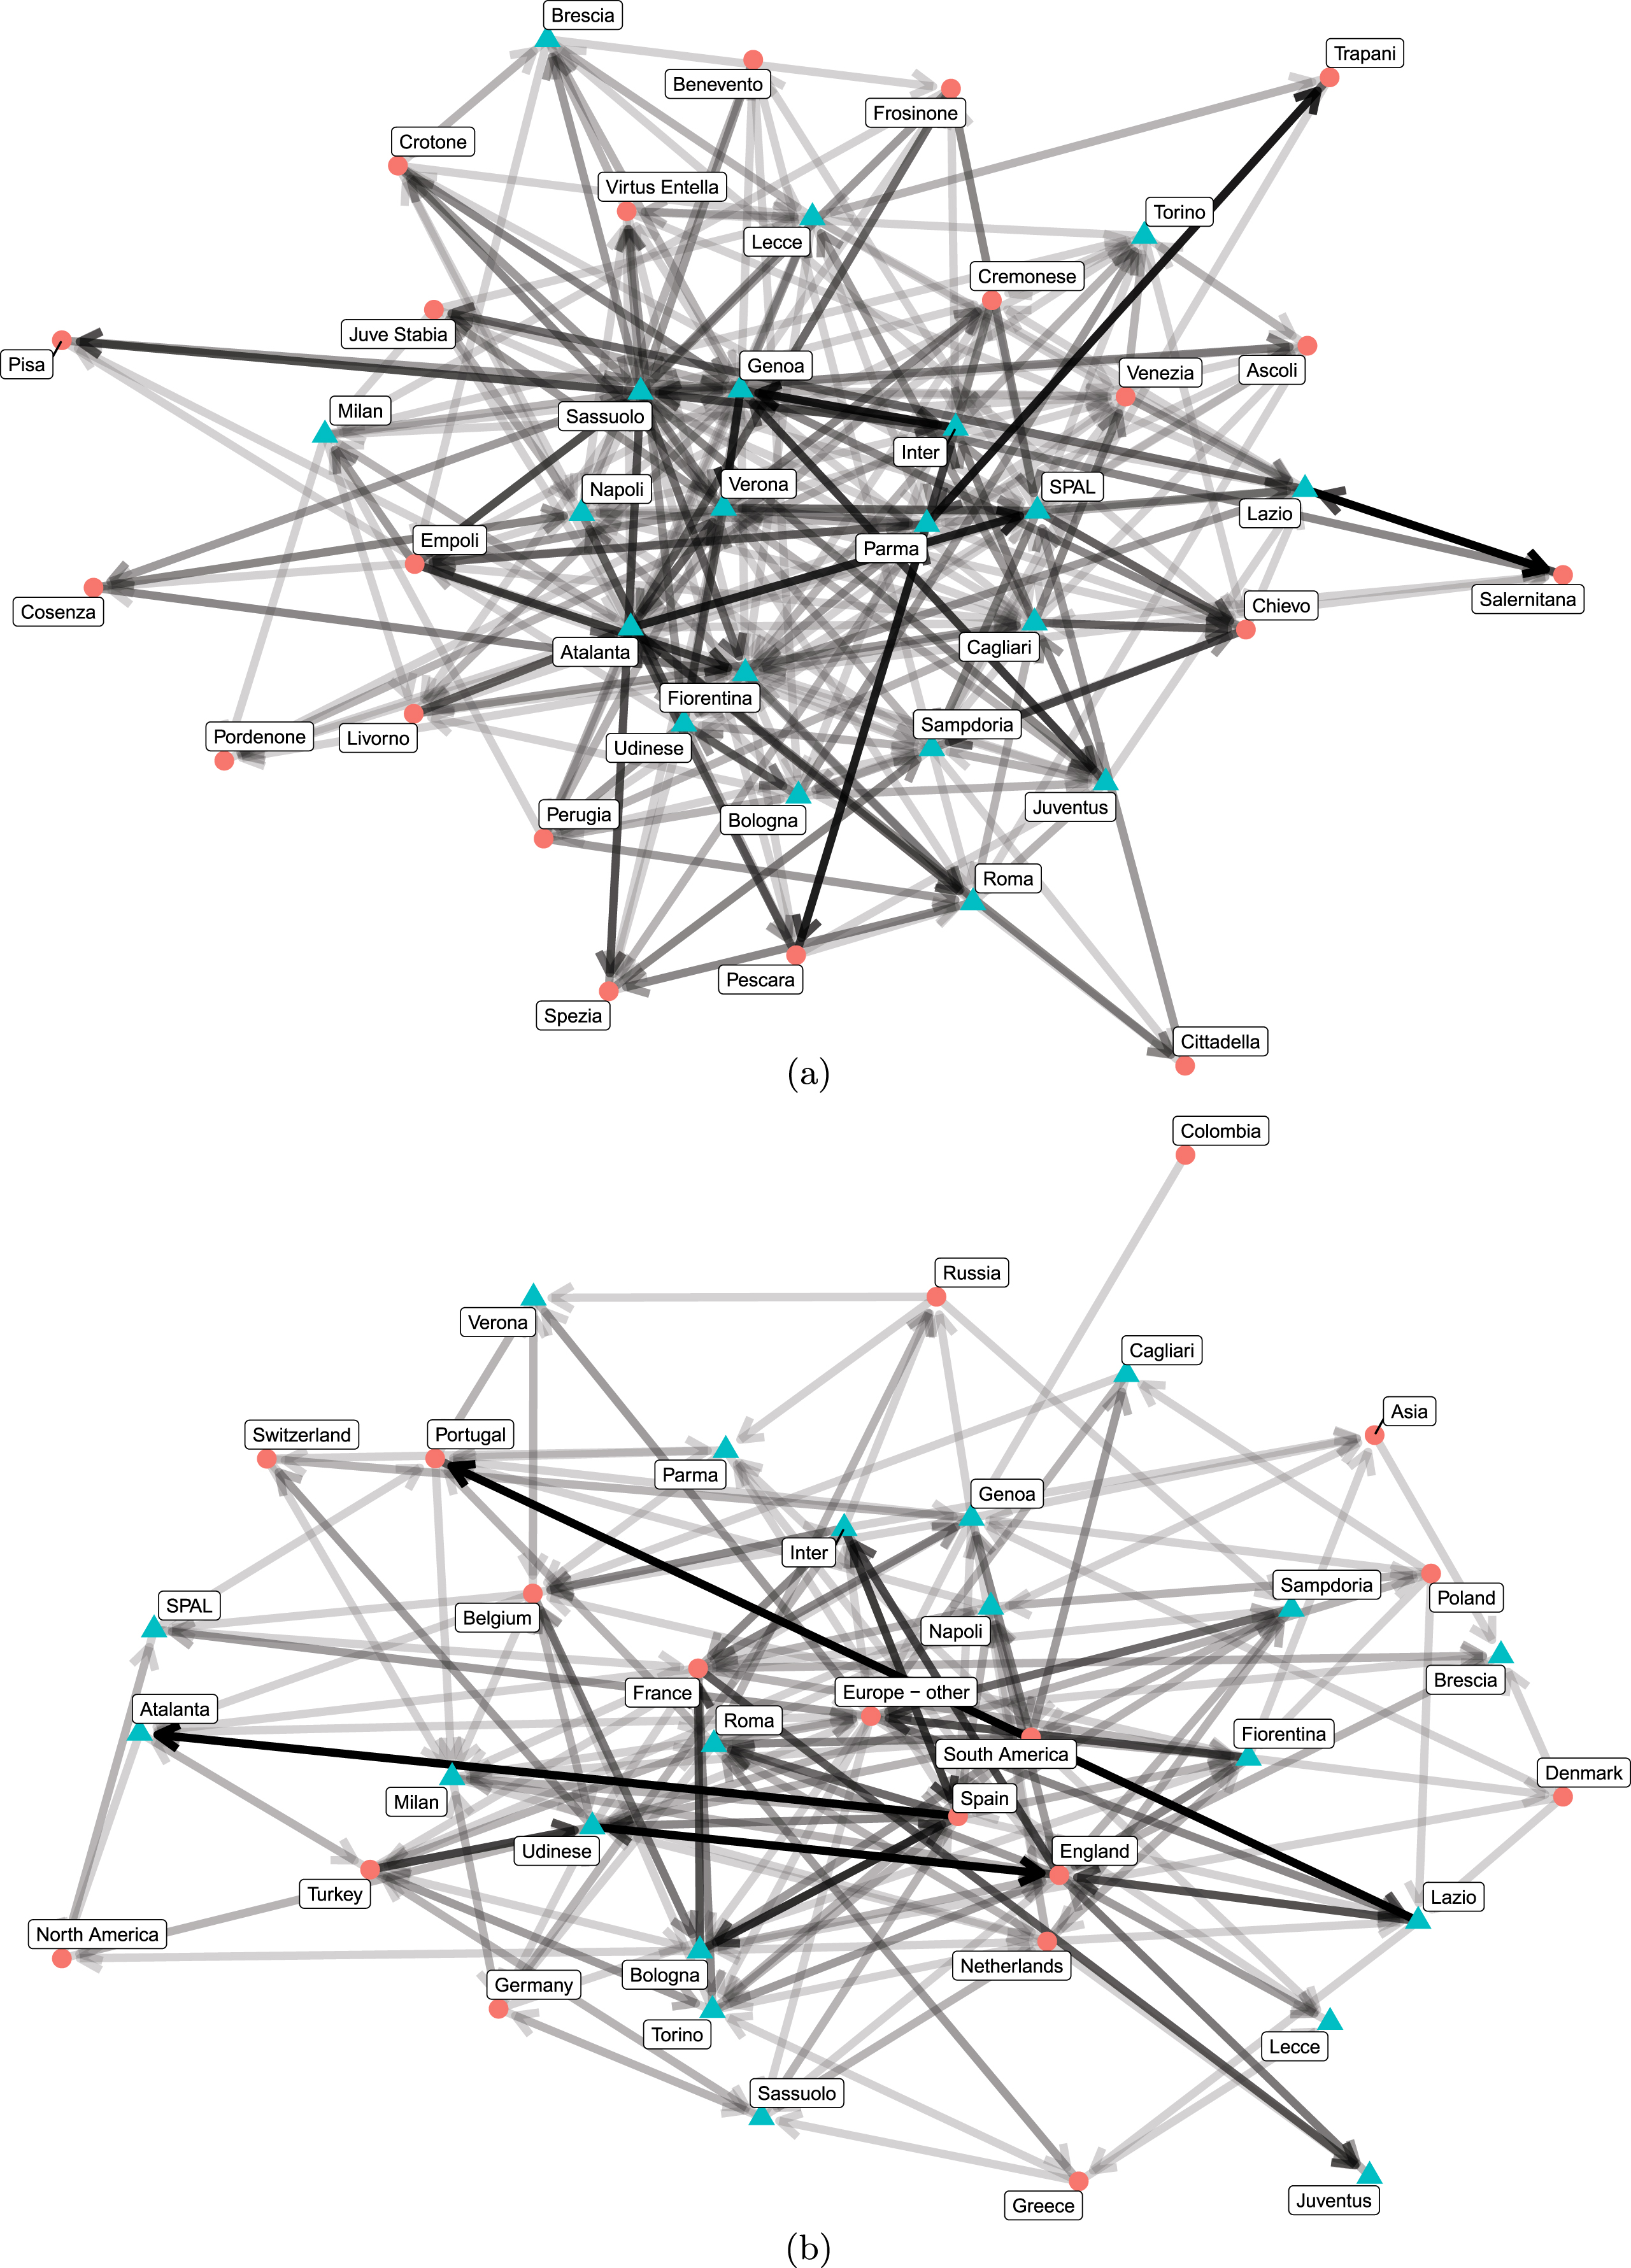 Network of domestic transfers between Italian Serie A and Serie B teams (panel a) and international transfers obtained by aggregating teams by their nation or geographical area (panel b), excluding retired and free players. Serie A teams are the triangular-shaped nodes while the tie transparency is proportional to the number of transfers (weights ωij).